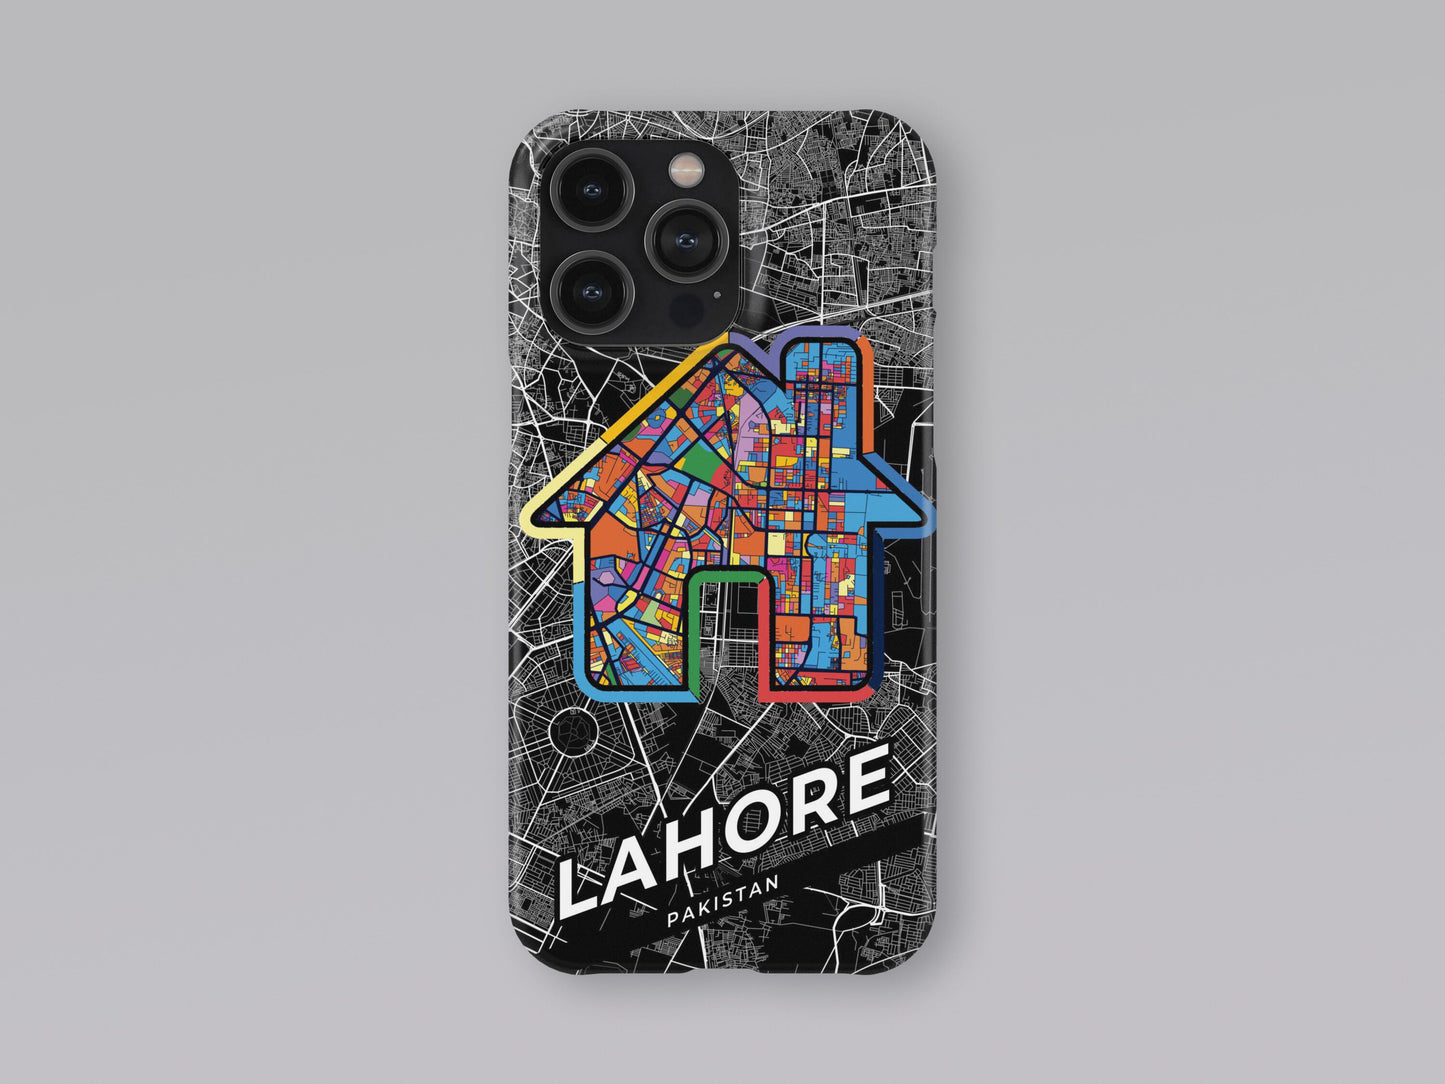 Lahore Pakistan slim phone case with colorful icon. Birthday, wedding or housewarming gift. Couple match cases. 3